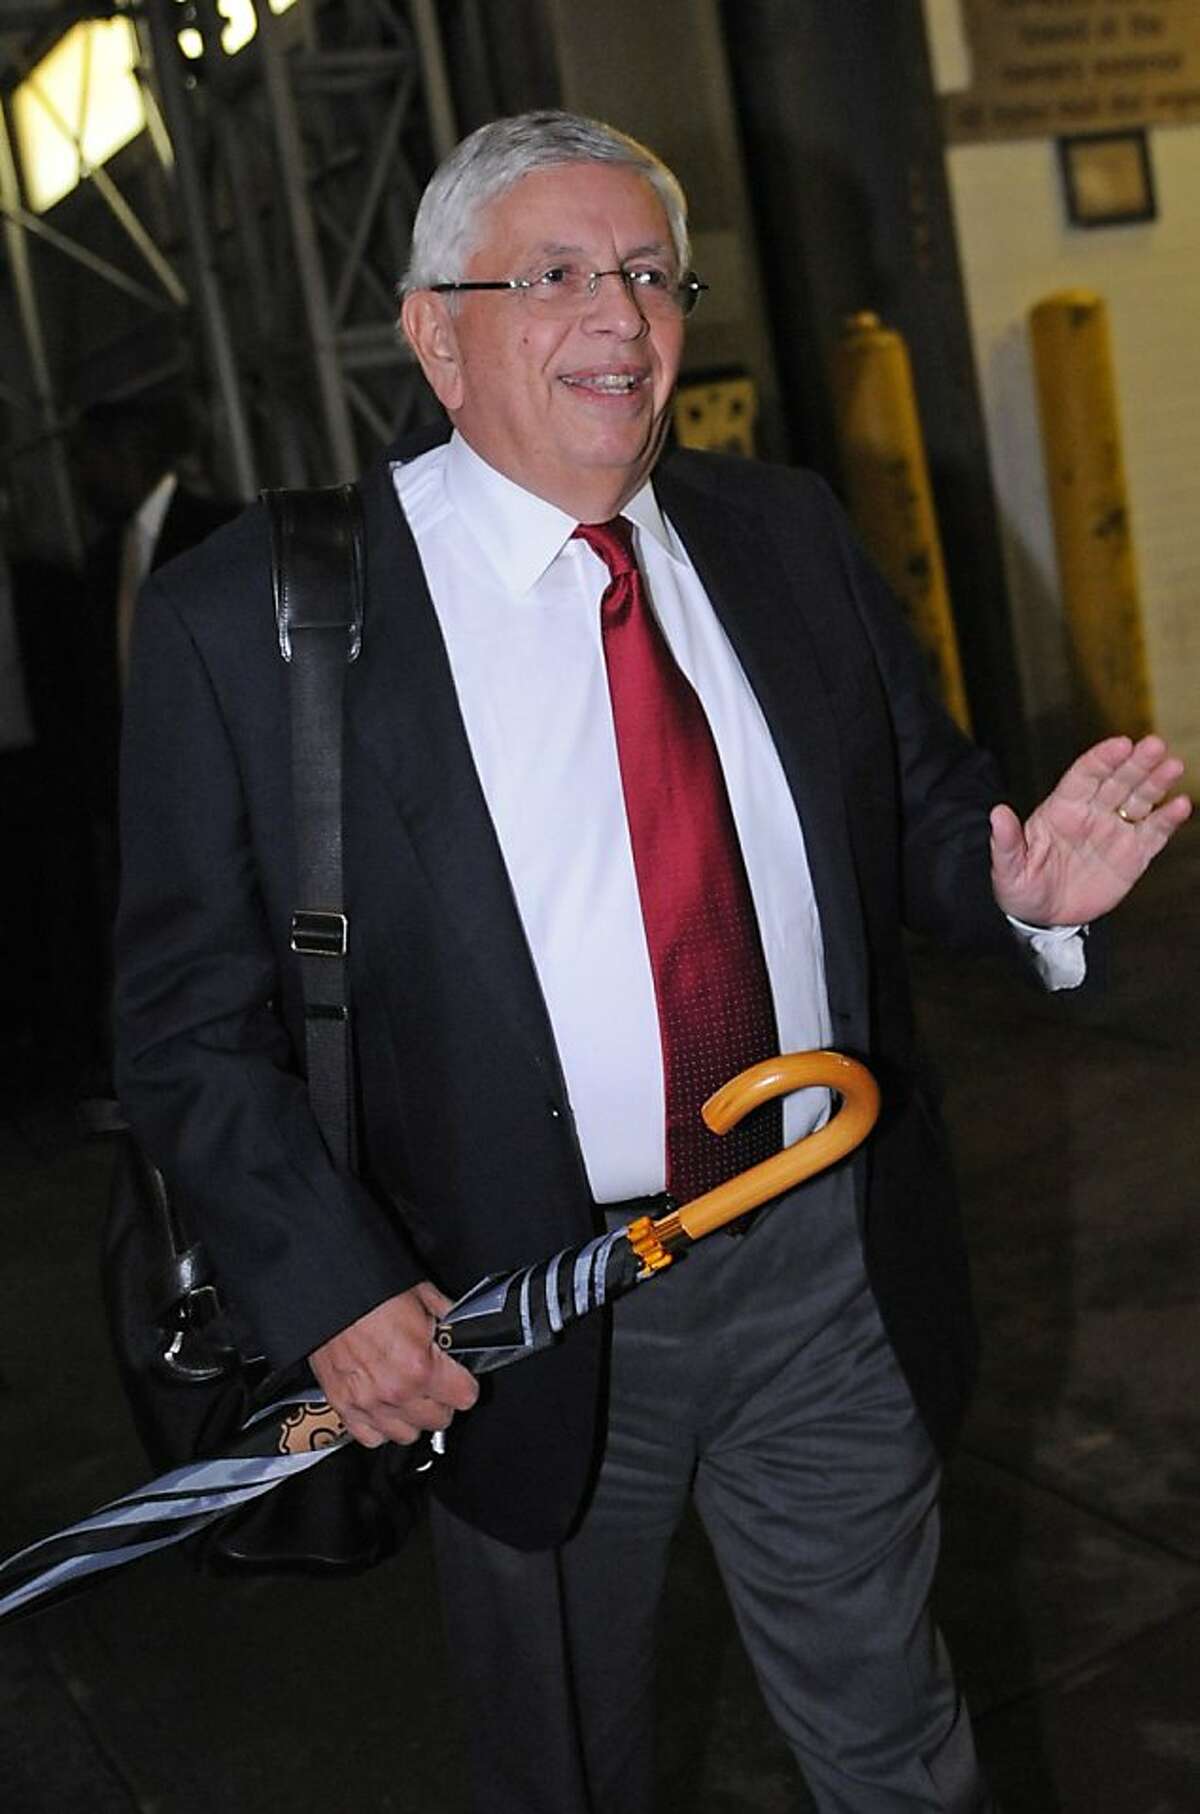 NBA Commissioner David Stern leaves the NBA labor negotiations after talks surpassed the seven-hour mark Wednesday, Oct. 19, 2011, in New York. NBA owners and players are meeting for a second straight day, shortly after finishing a 16-hour marathon with a federal mediator. (AP Photo/Louis Lanzano)